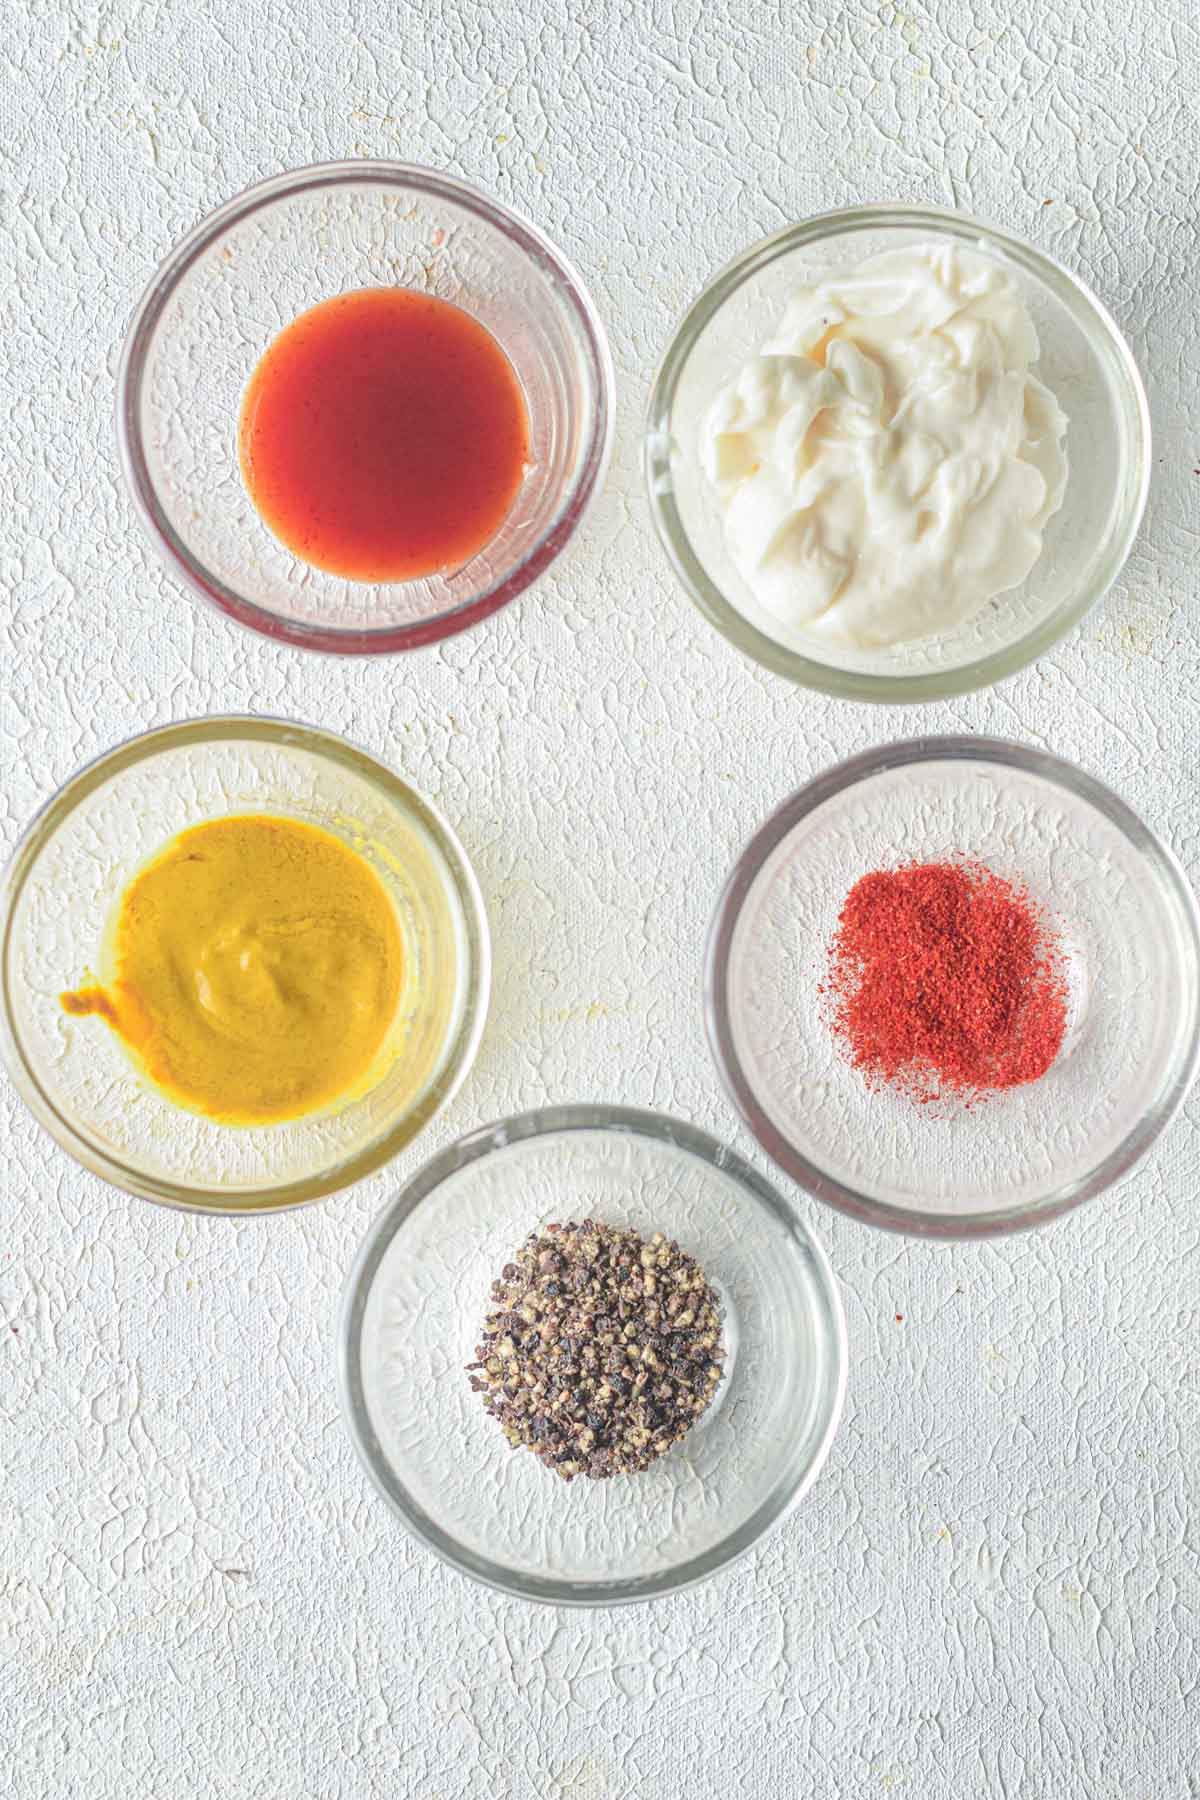 dressing ingredients in small glass bowls on counter